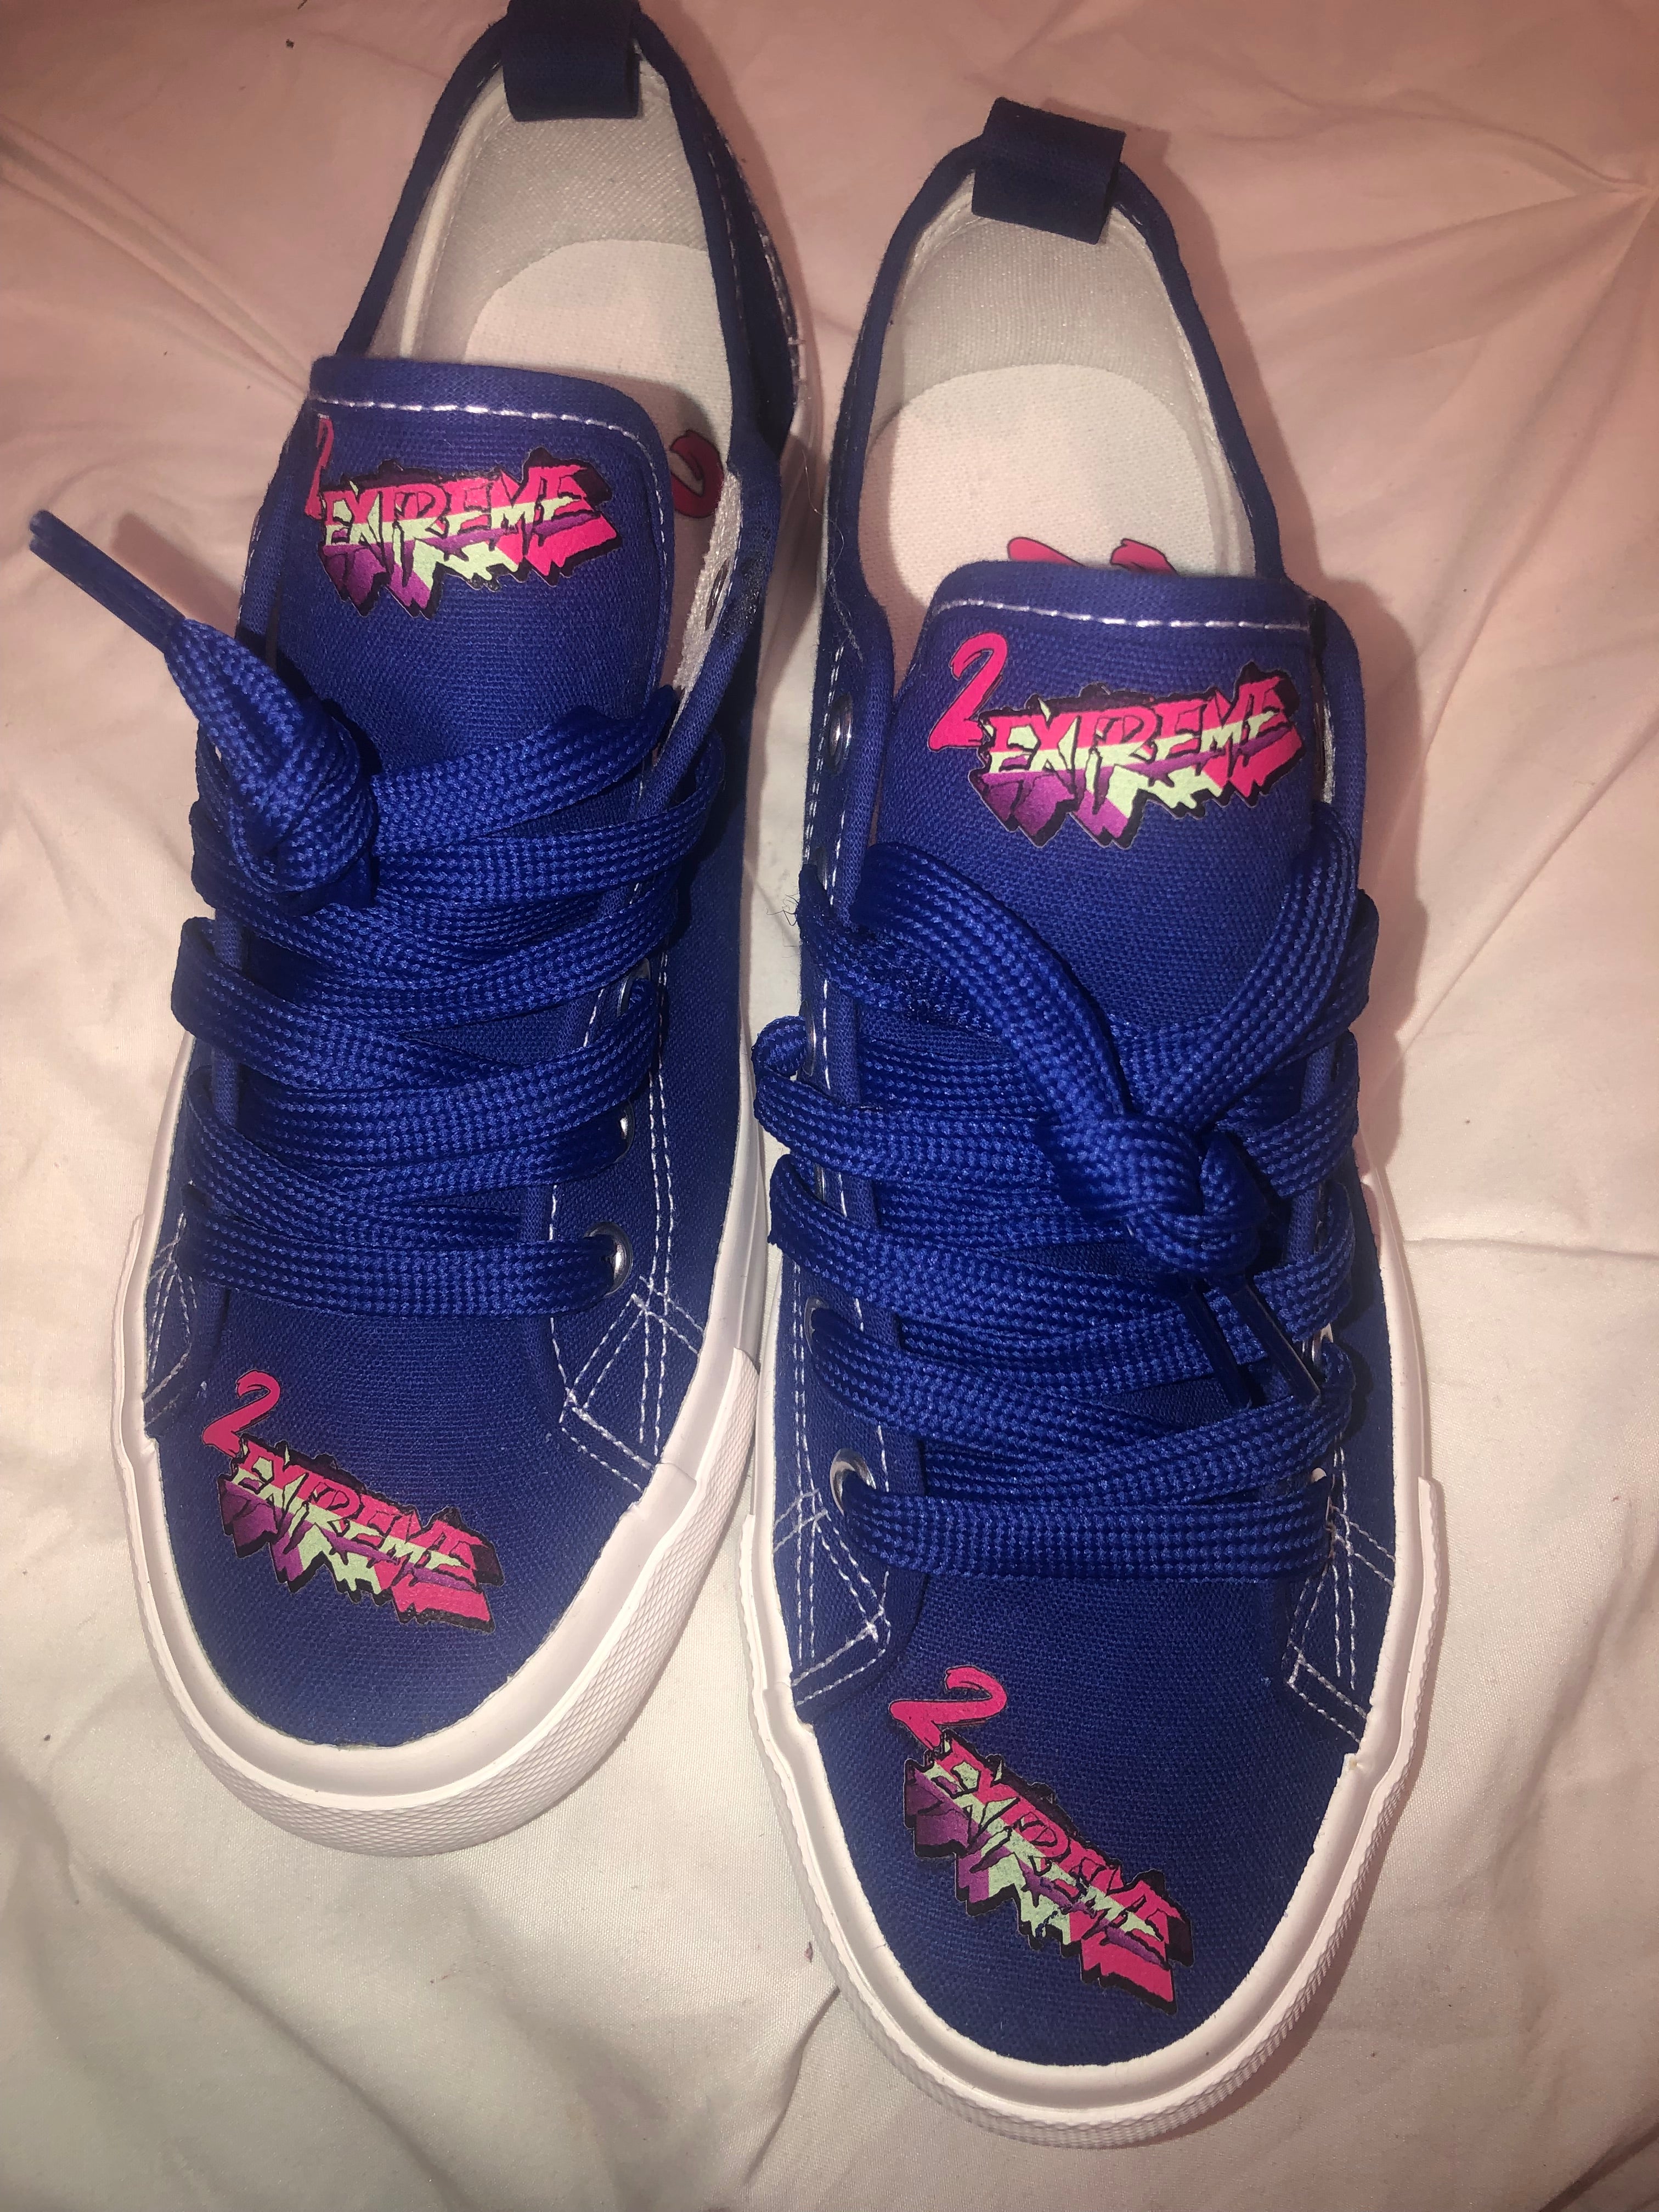 2Extreme Canvas Sneakers Blue